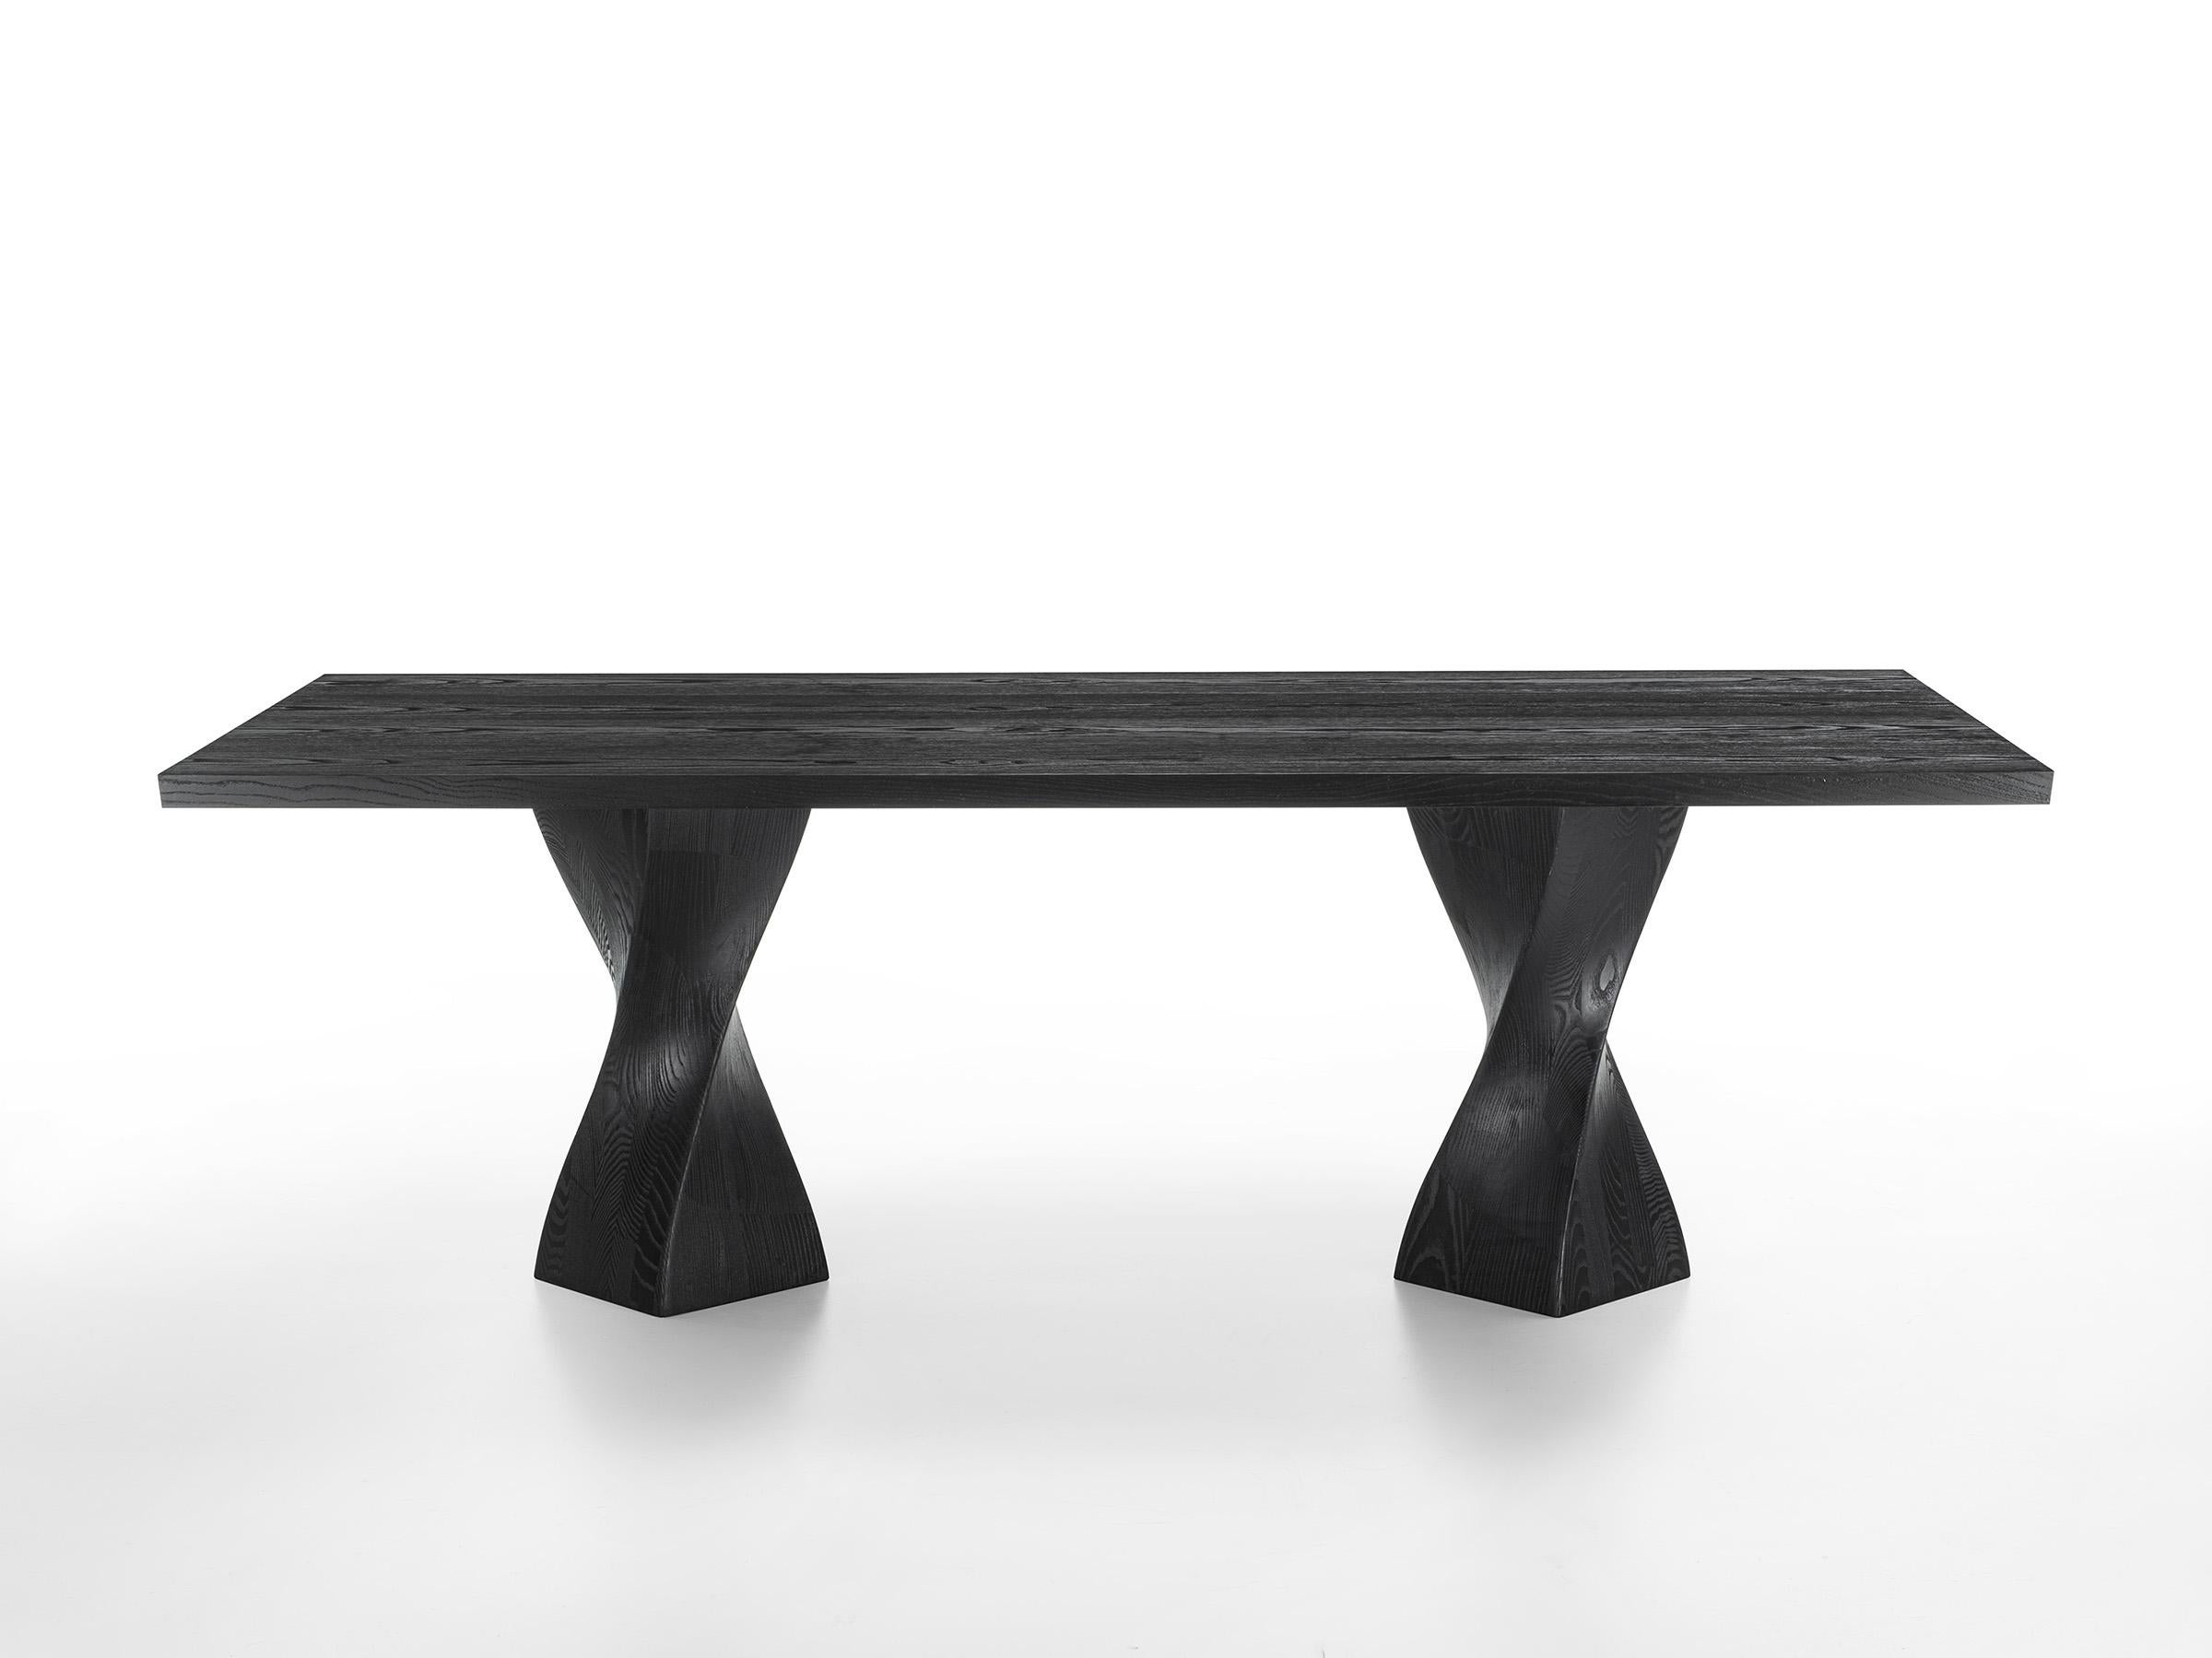 Italian Simple Twist Wood Table, Designed by Studio Excalibur, Made in Italy For Sale